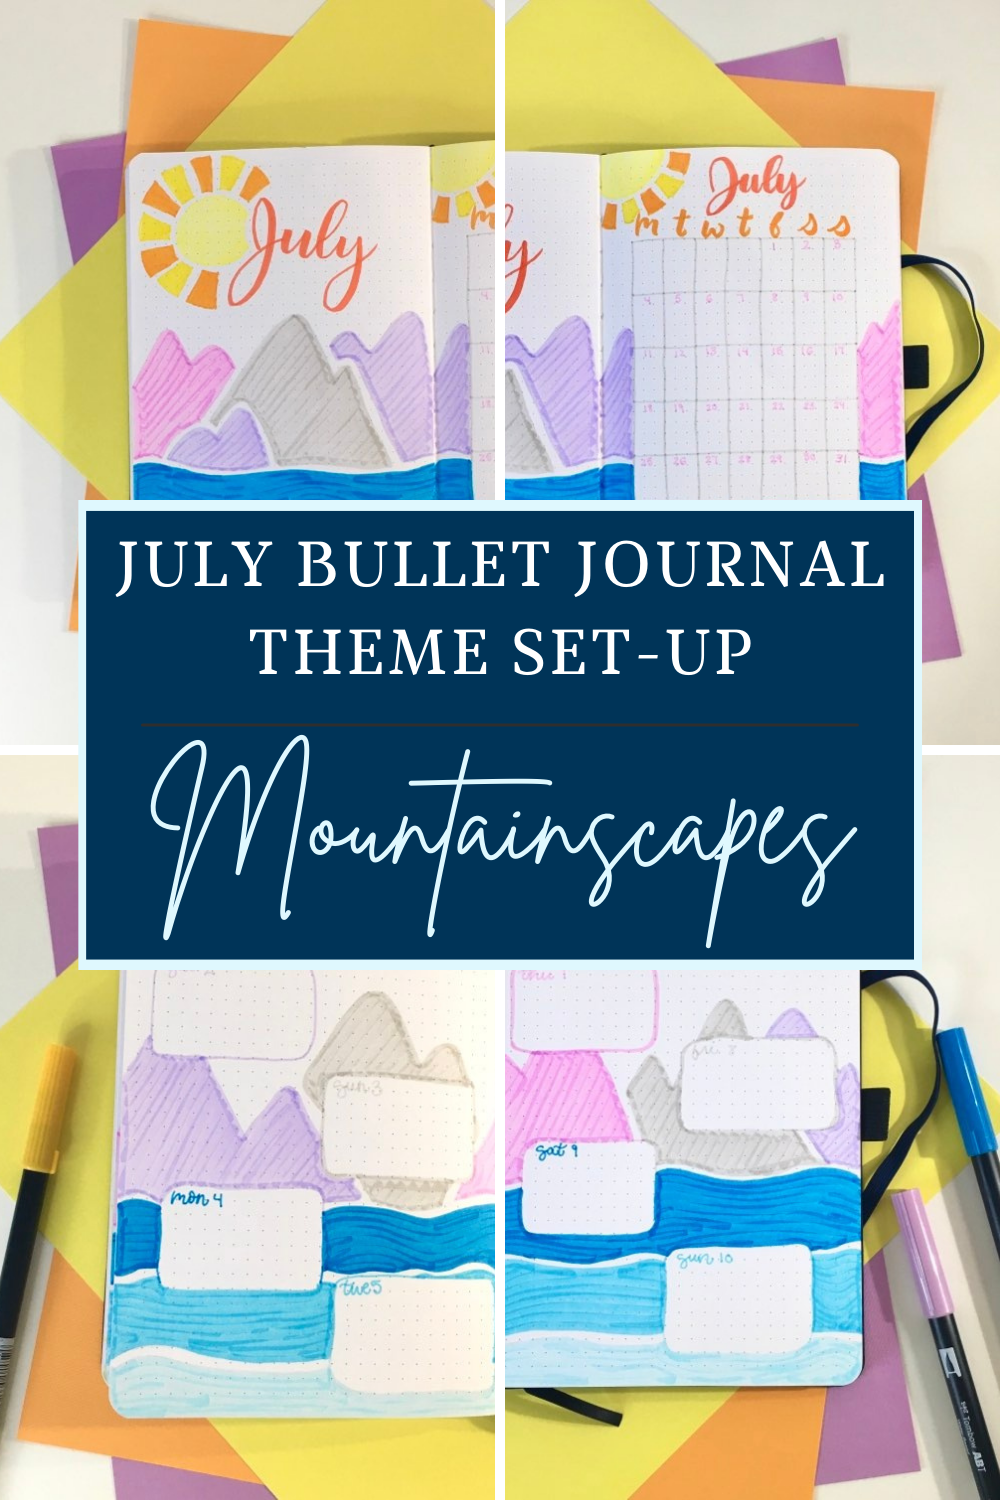 July Bullet Journal Theme Set Up Mountainscapes The Hobby Scheme